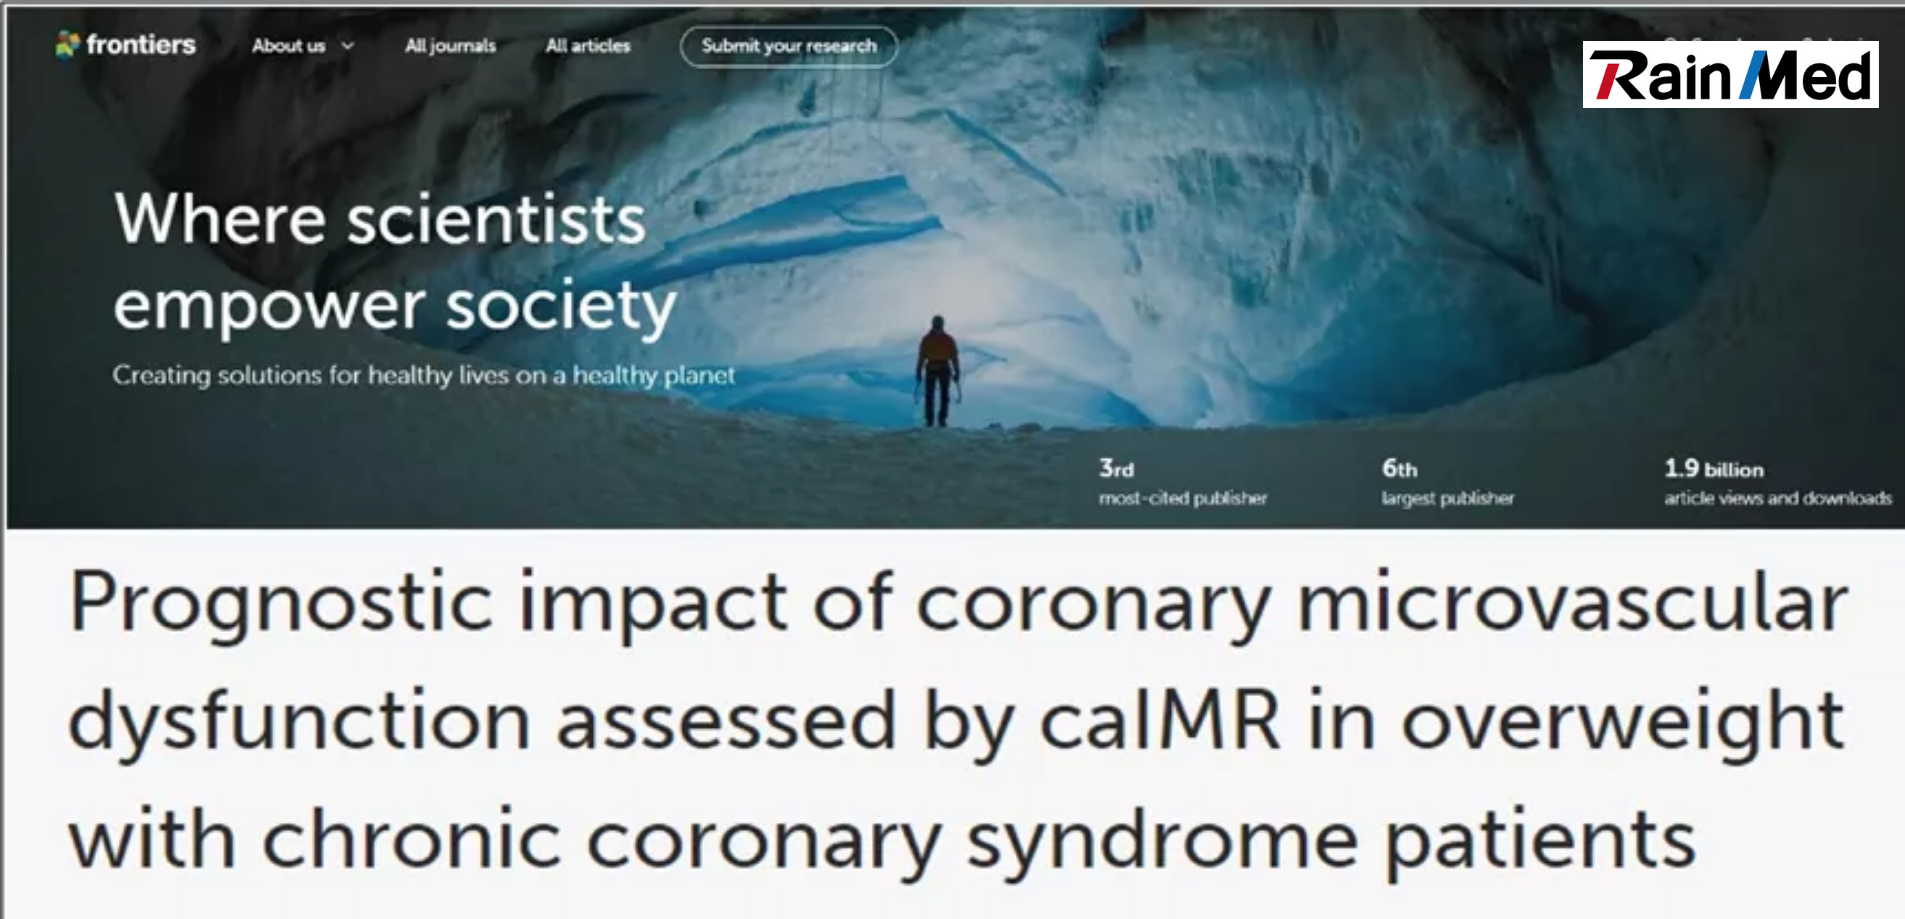 New Progress Has Been Made in the Clinical Study of RainMed’s caIMR System: It Can Independently Predict the Prognostic Value of Overweight Patients with Chronic Coronary Syndrome , and Improve the Global Epidemic Management Level